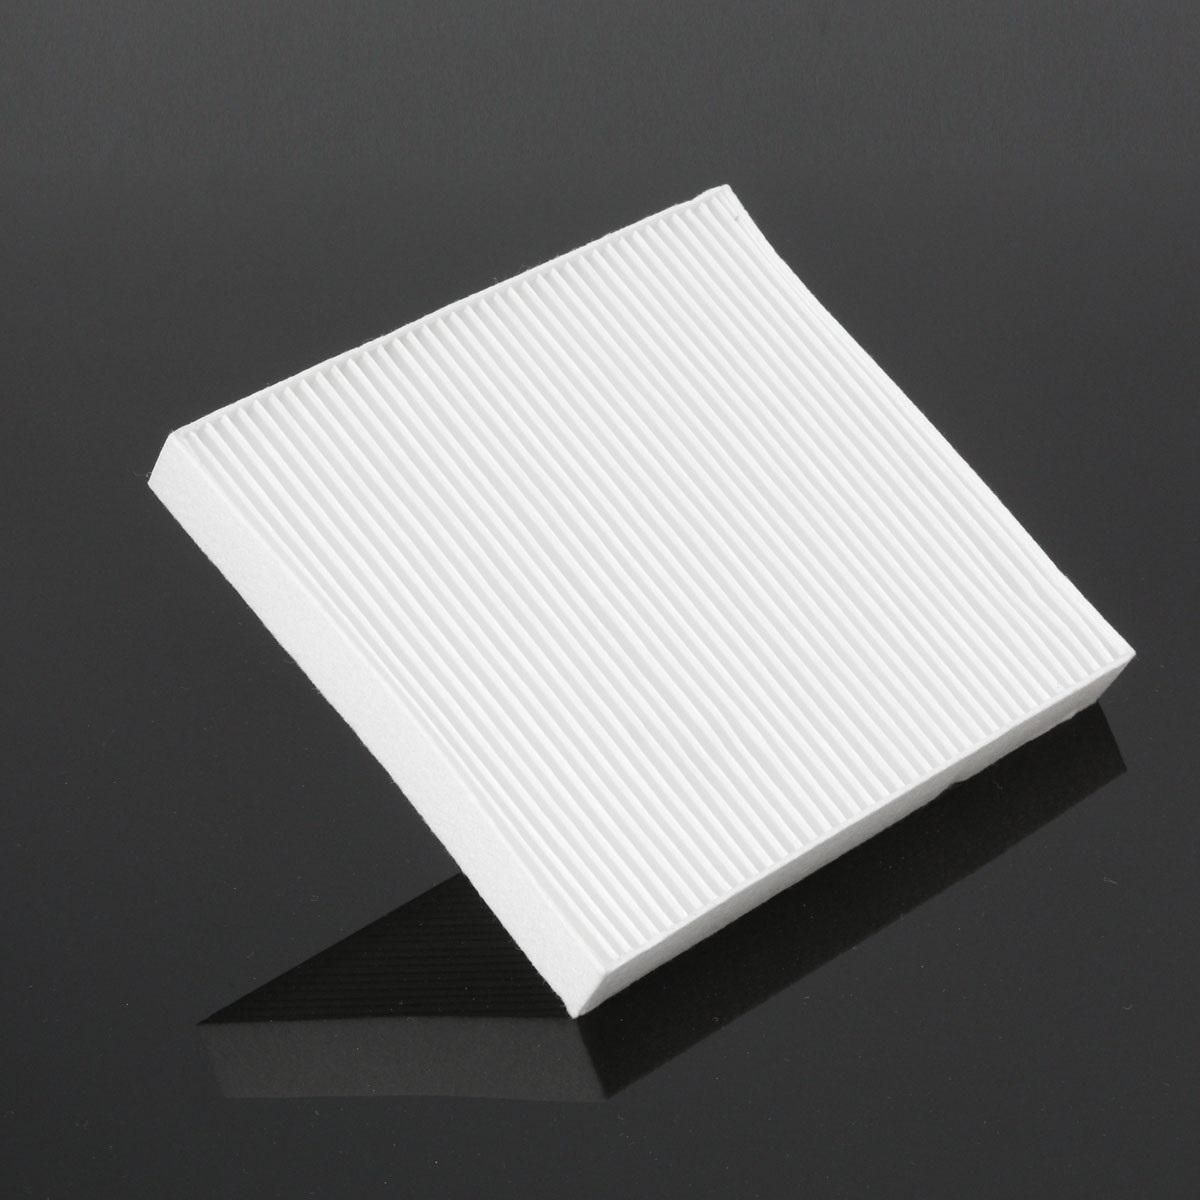 Yulicoauto AIR COND CABIN AIR FILTER for Toyota Hiace year 2008-2017